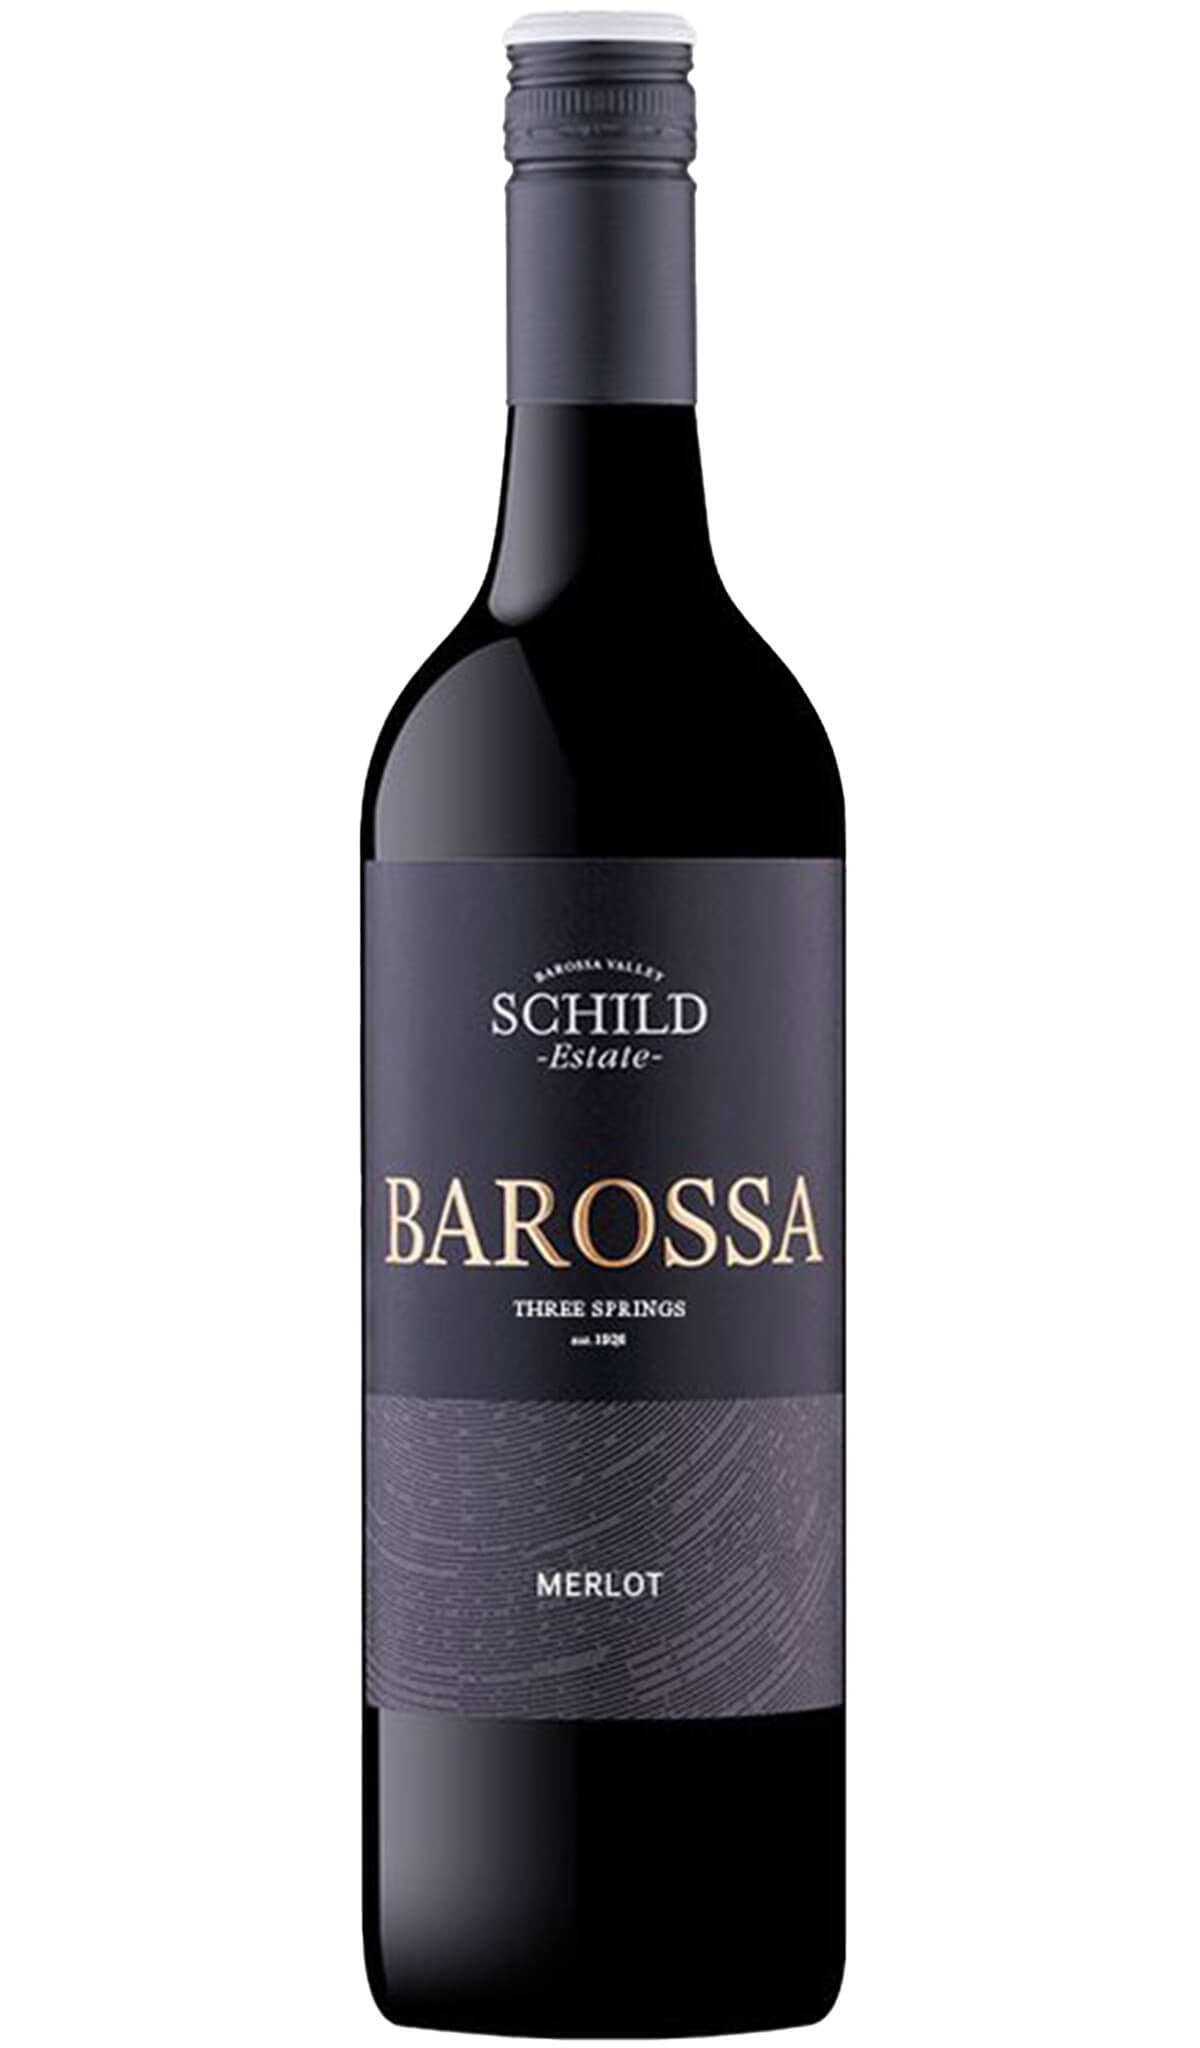 Find out more or buy Schild Estate Merlot 2020 (Barossa Valley) online at Wine Sellers Direct - Australia’s independent liquor specialists.